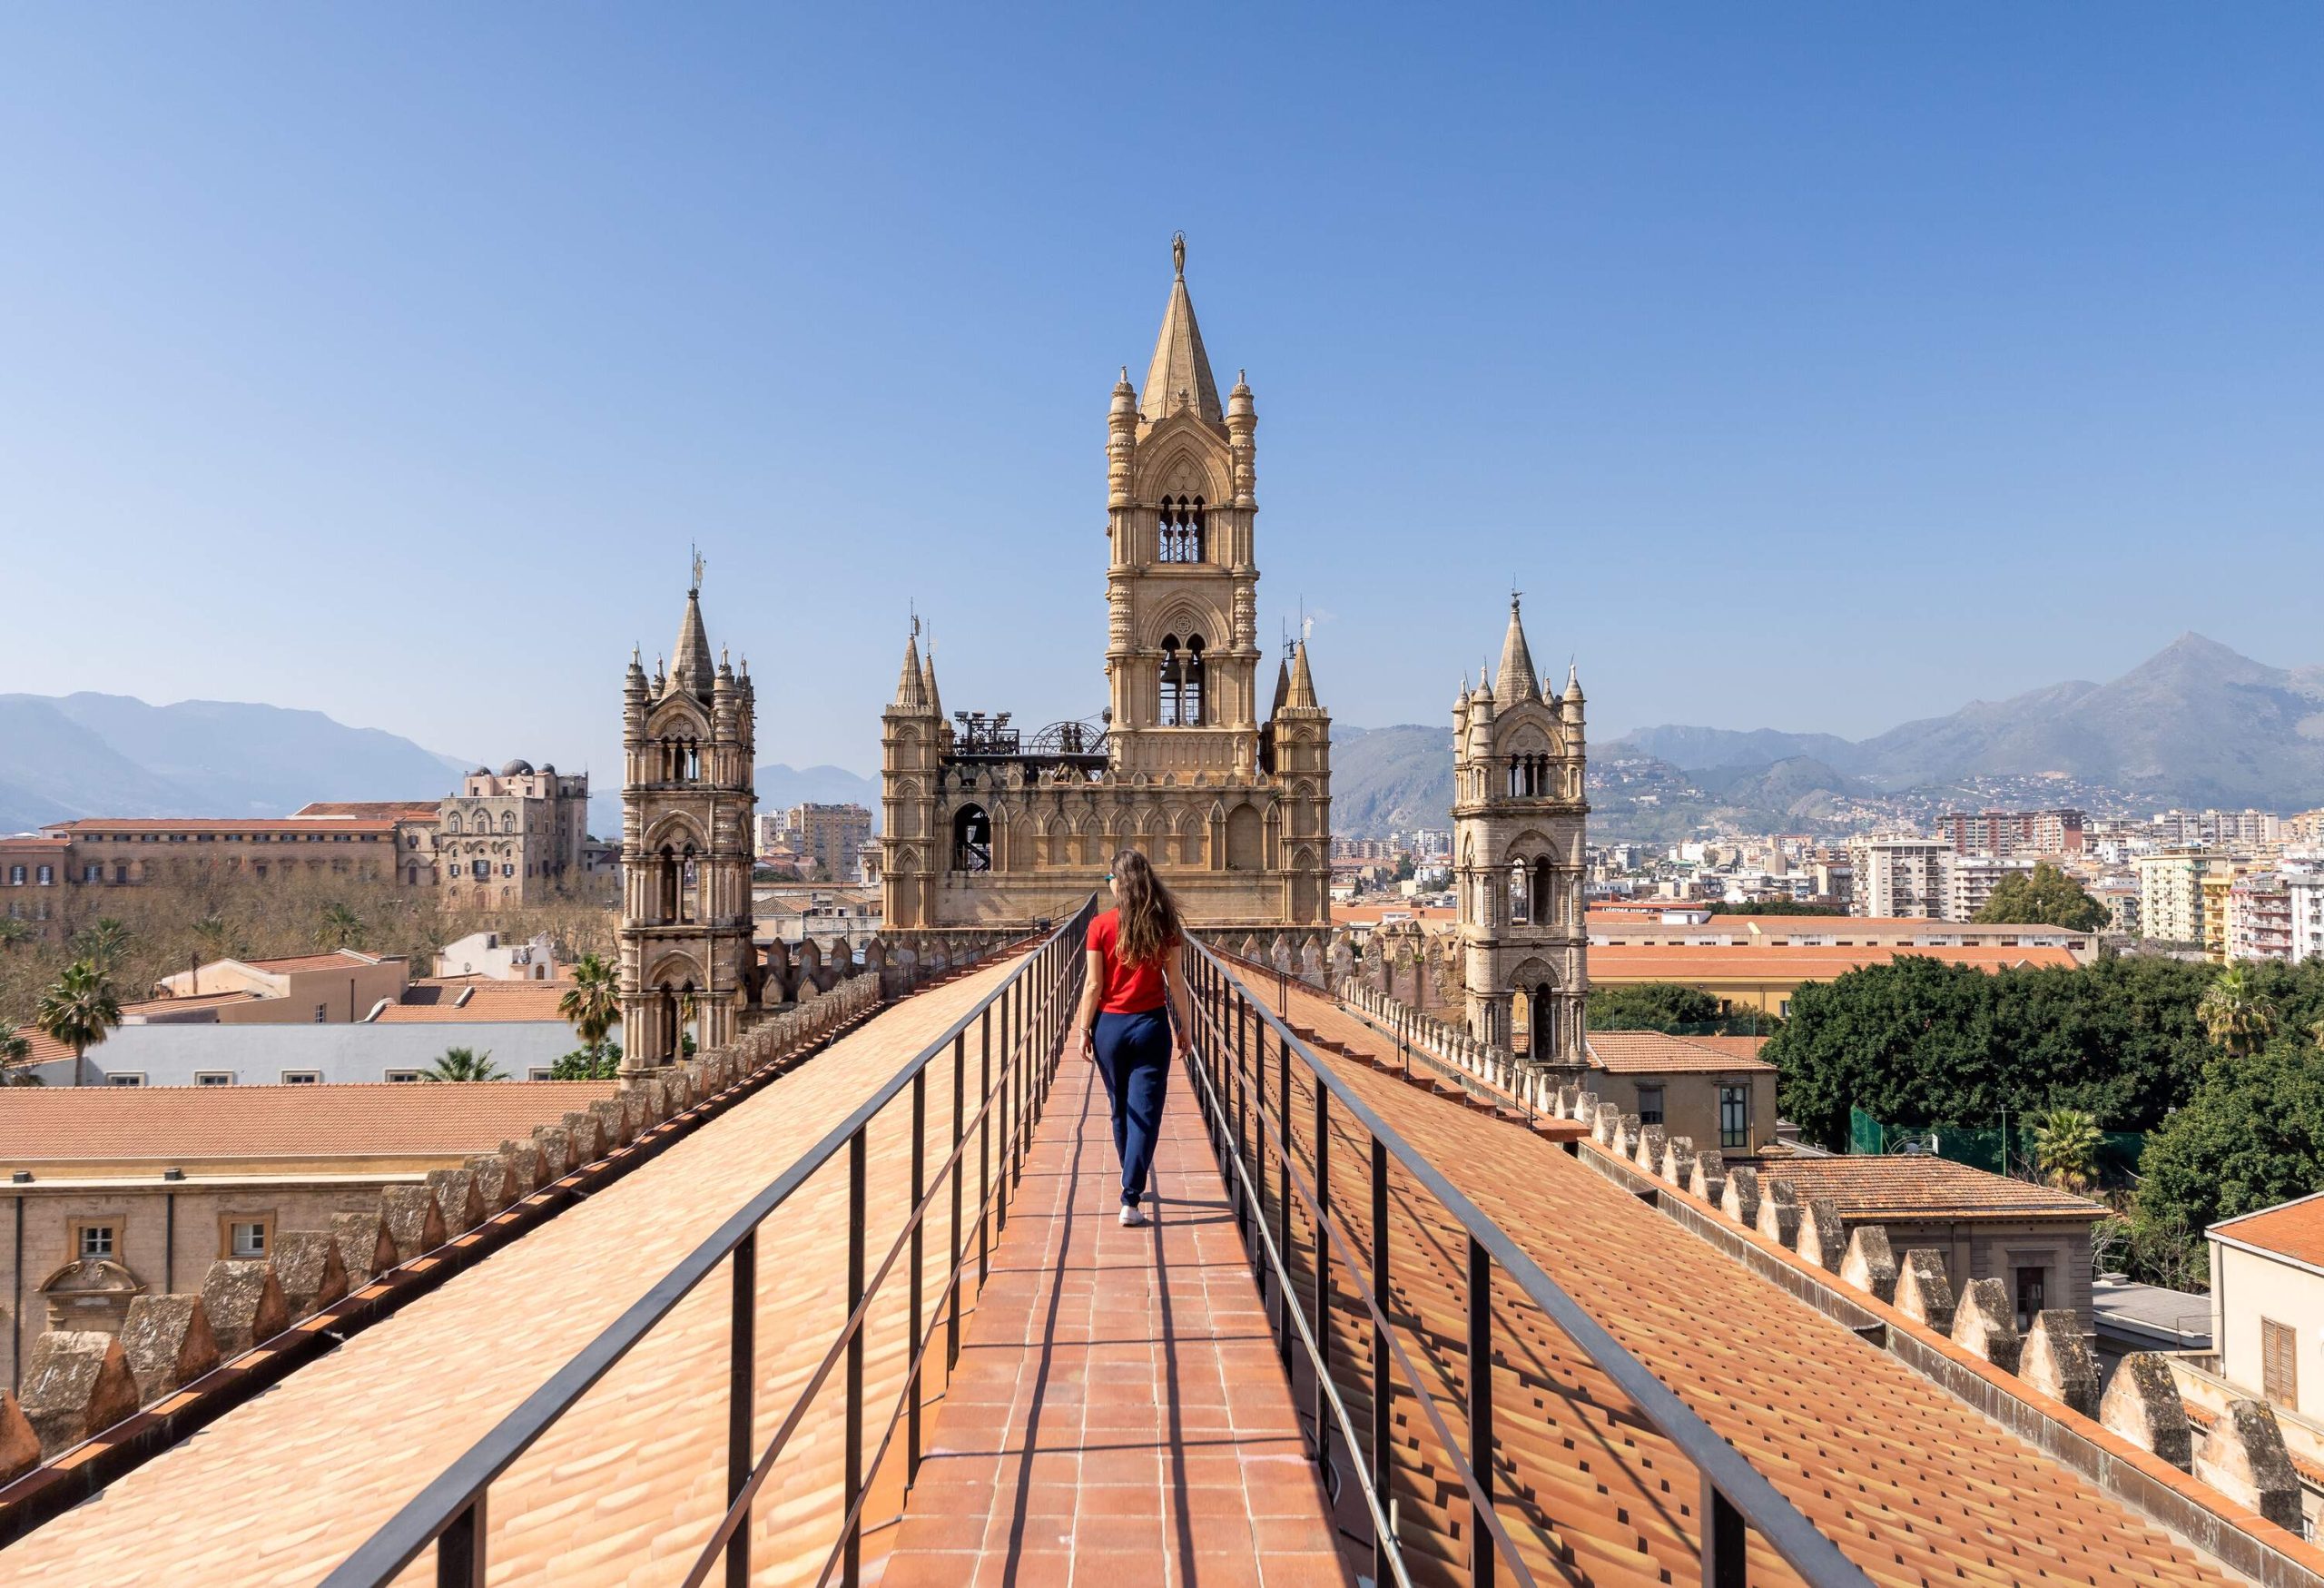 A woman walks on a rooftop walkway with guardrails with a view of the church's towers.